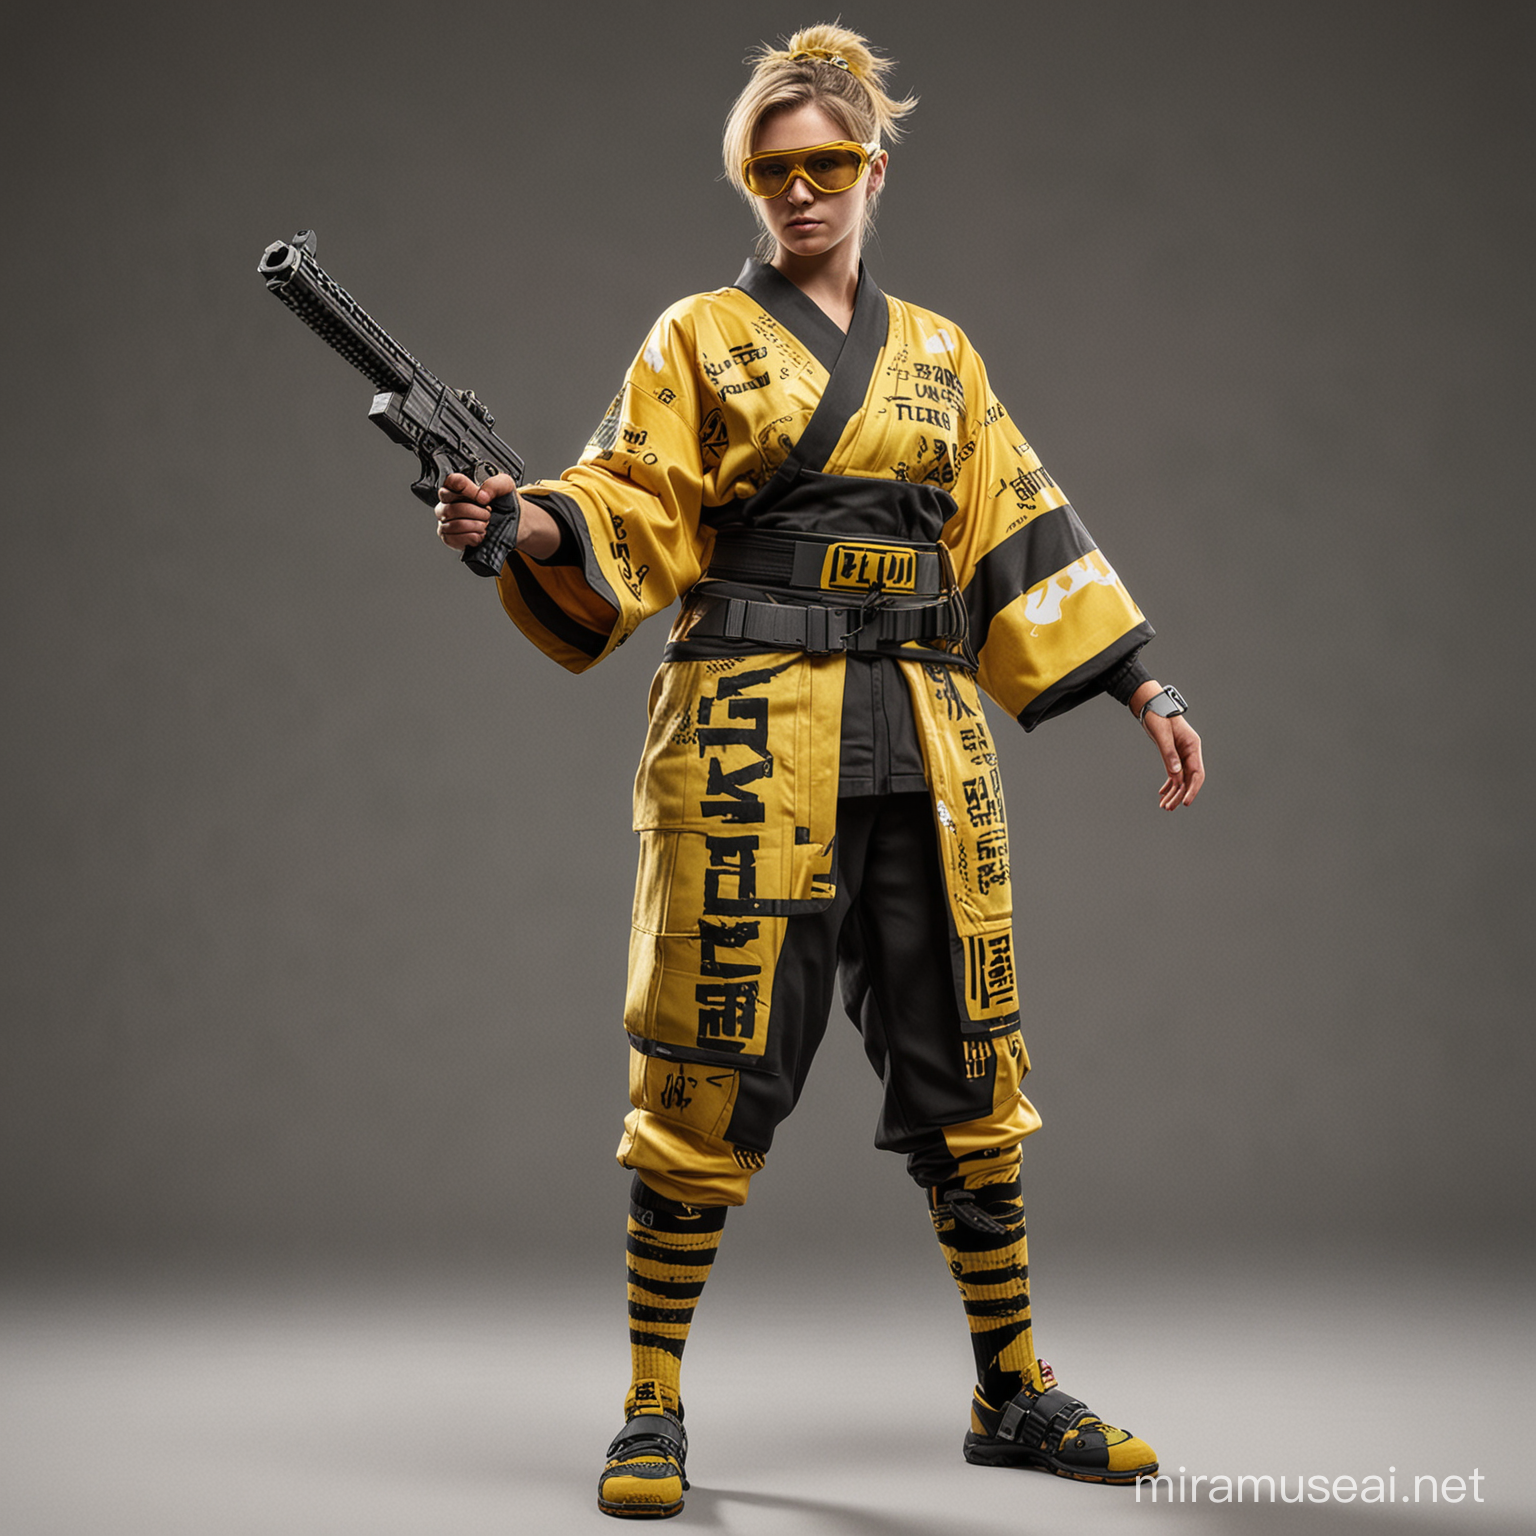 a light player model from the THE FINALS video game, wearing a yellow-and-black tactical kimono and tabi socks, wielding an uzi with the words "THE FINALS" written on the blade. their goggles are yellow and reflective